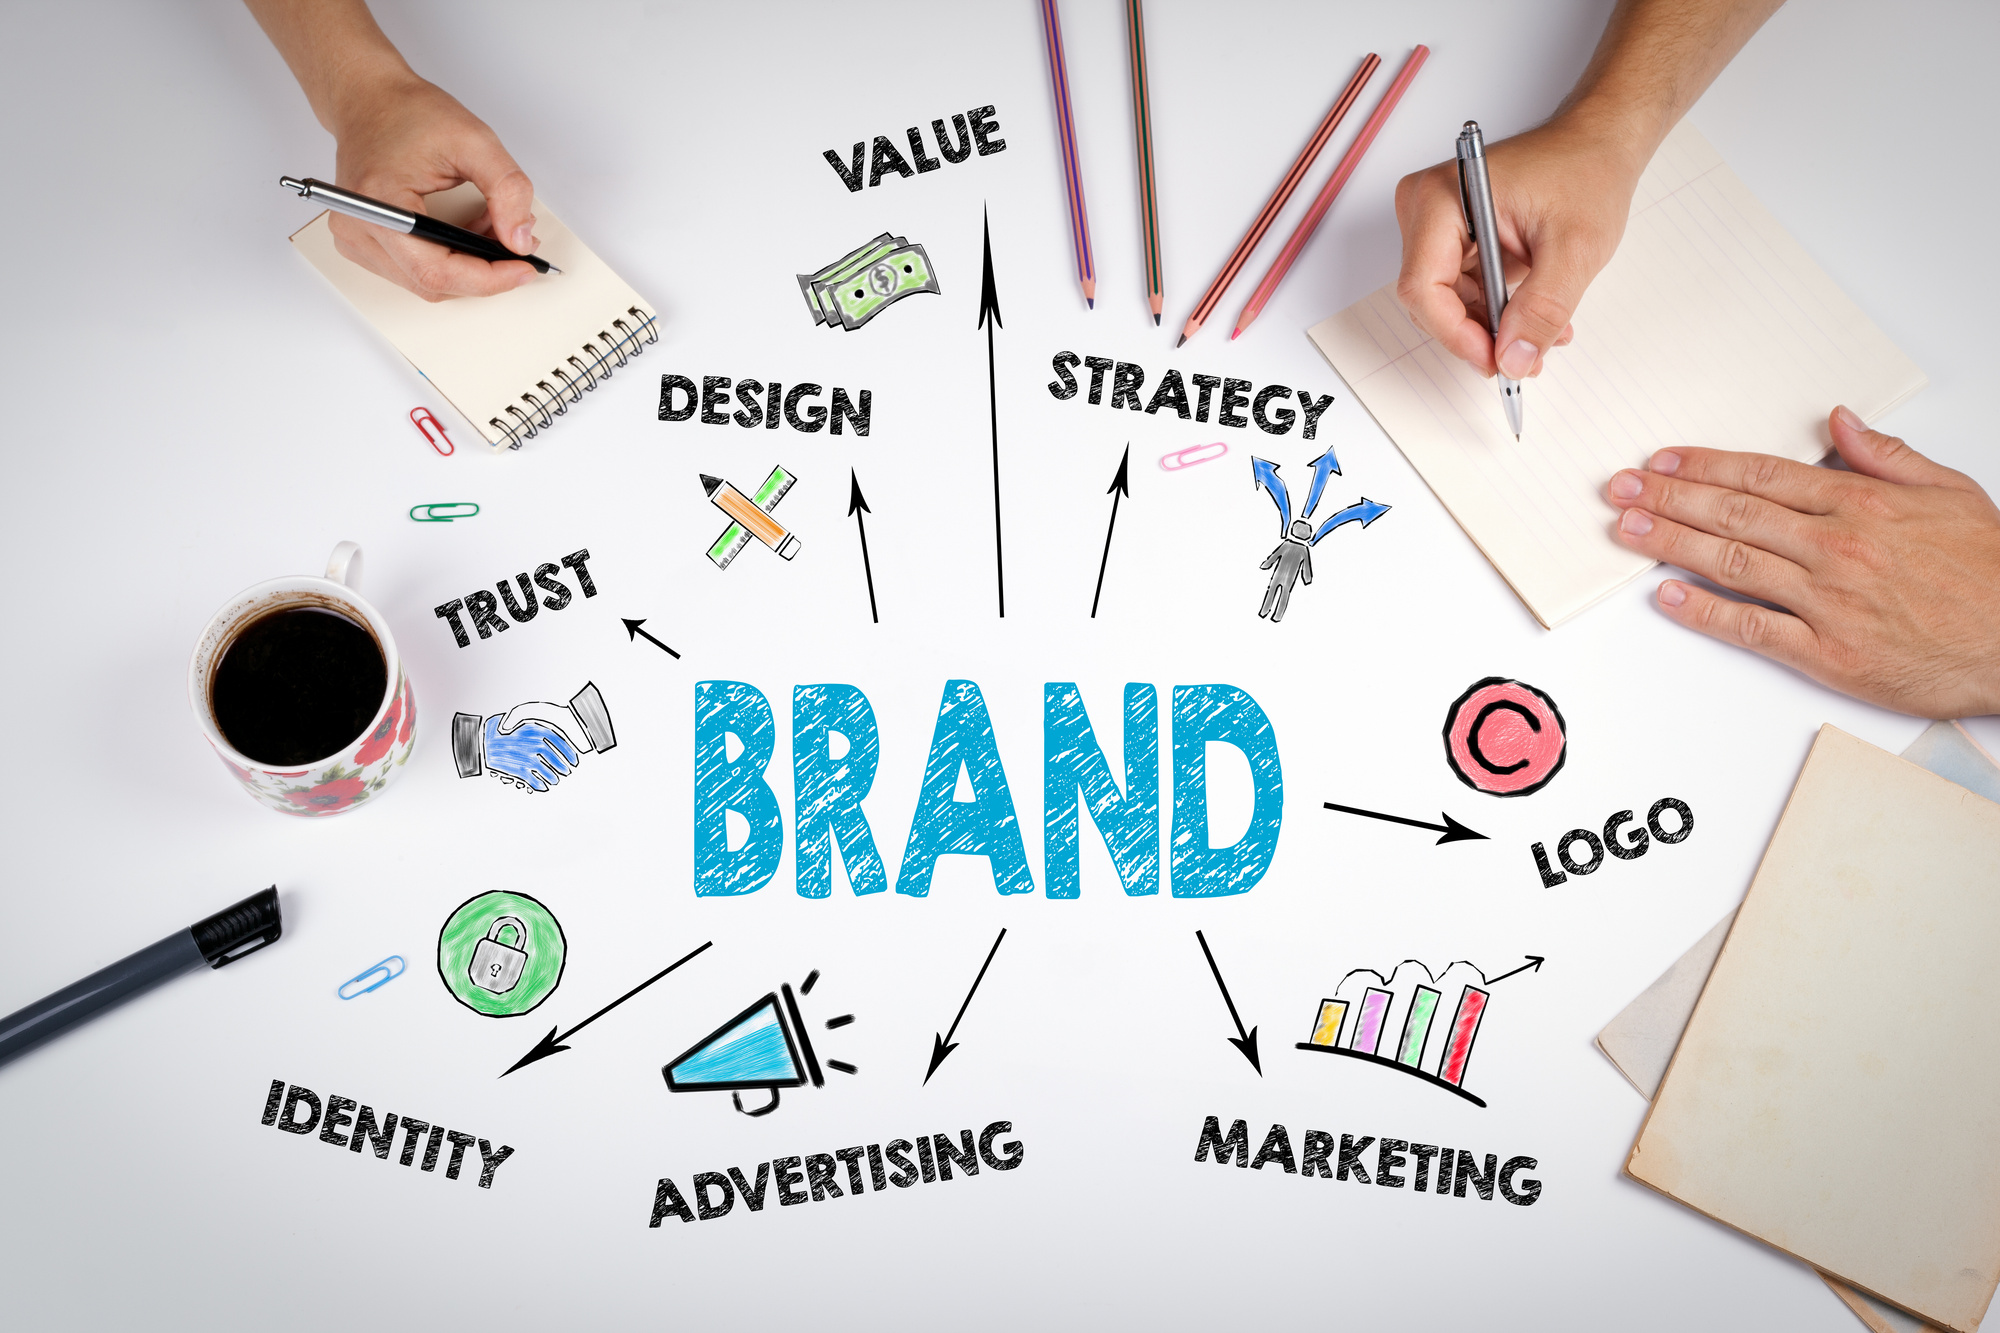 Building Trust And Credibility With Online Branding | DMC